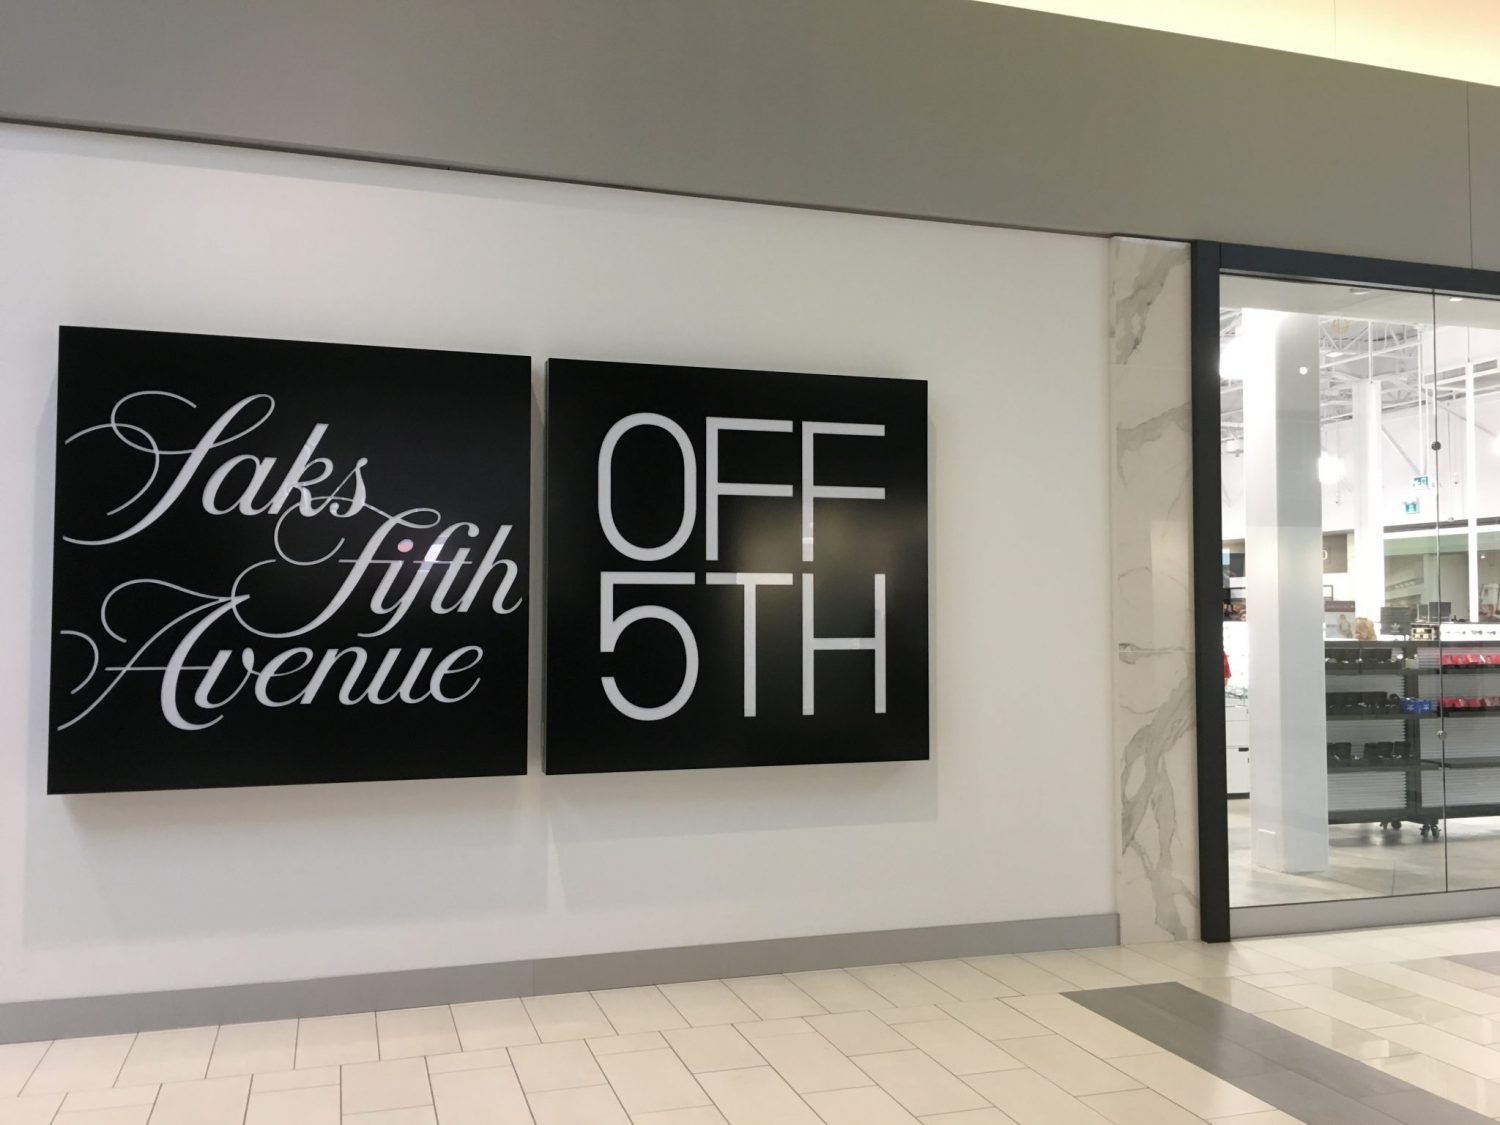 Saks Fifth Avenue opens first Canadian store